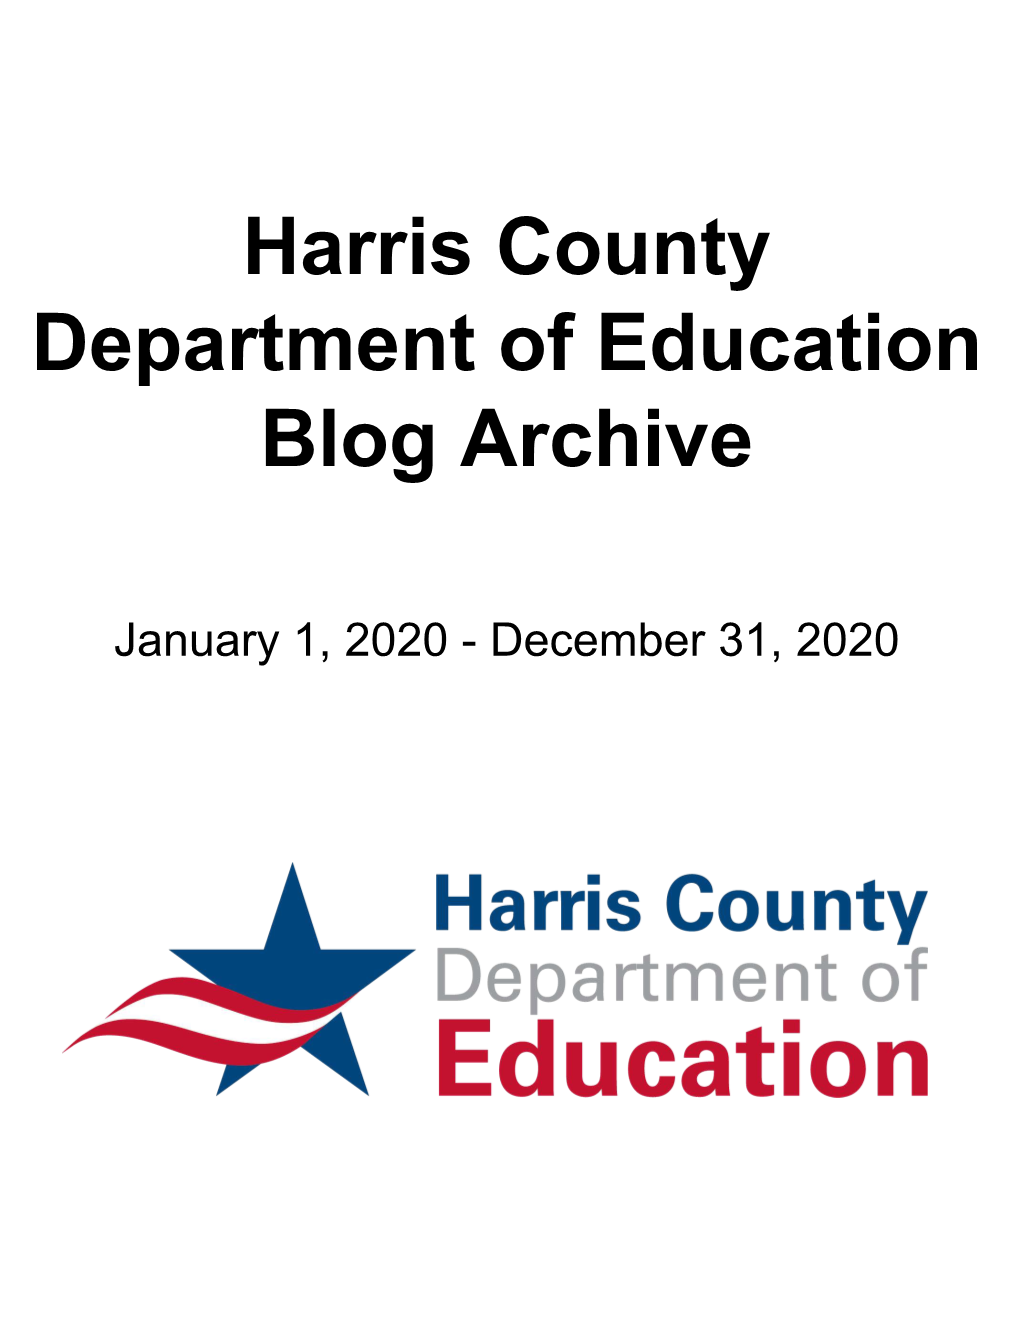 Harris County Department of Education Blog Archive